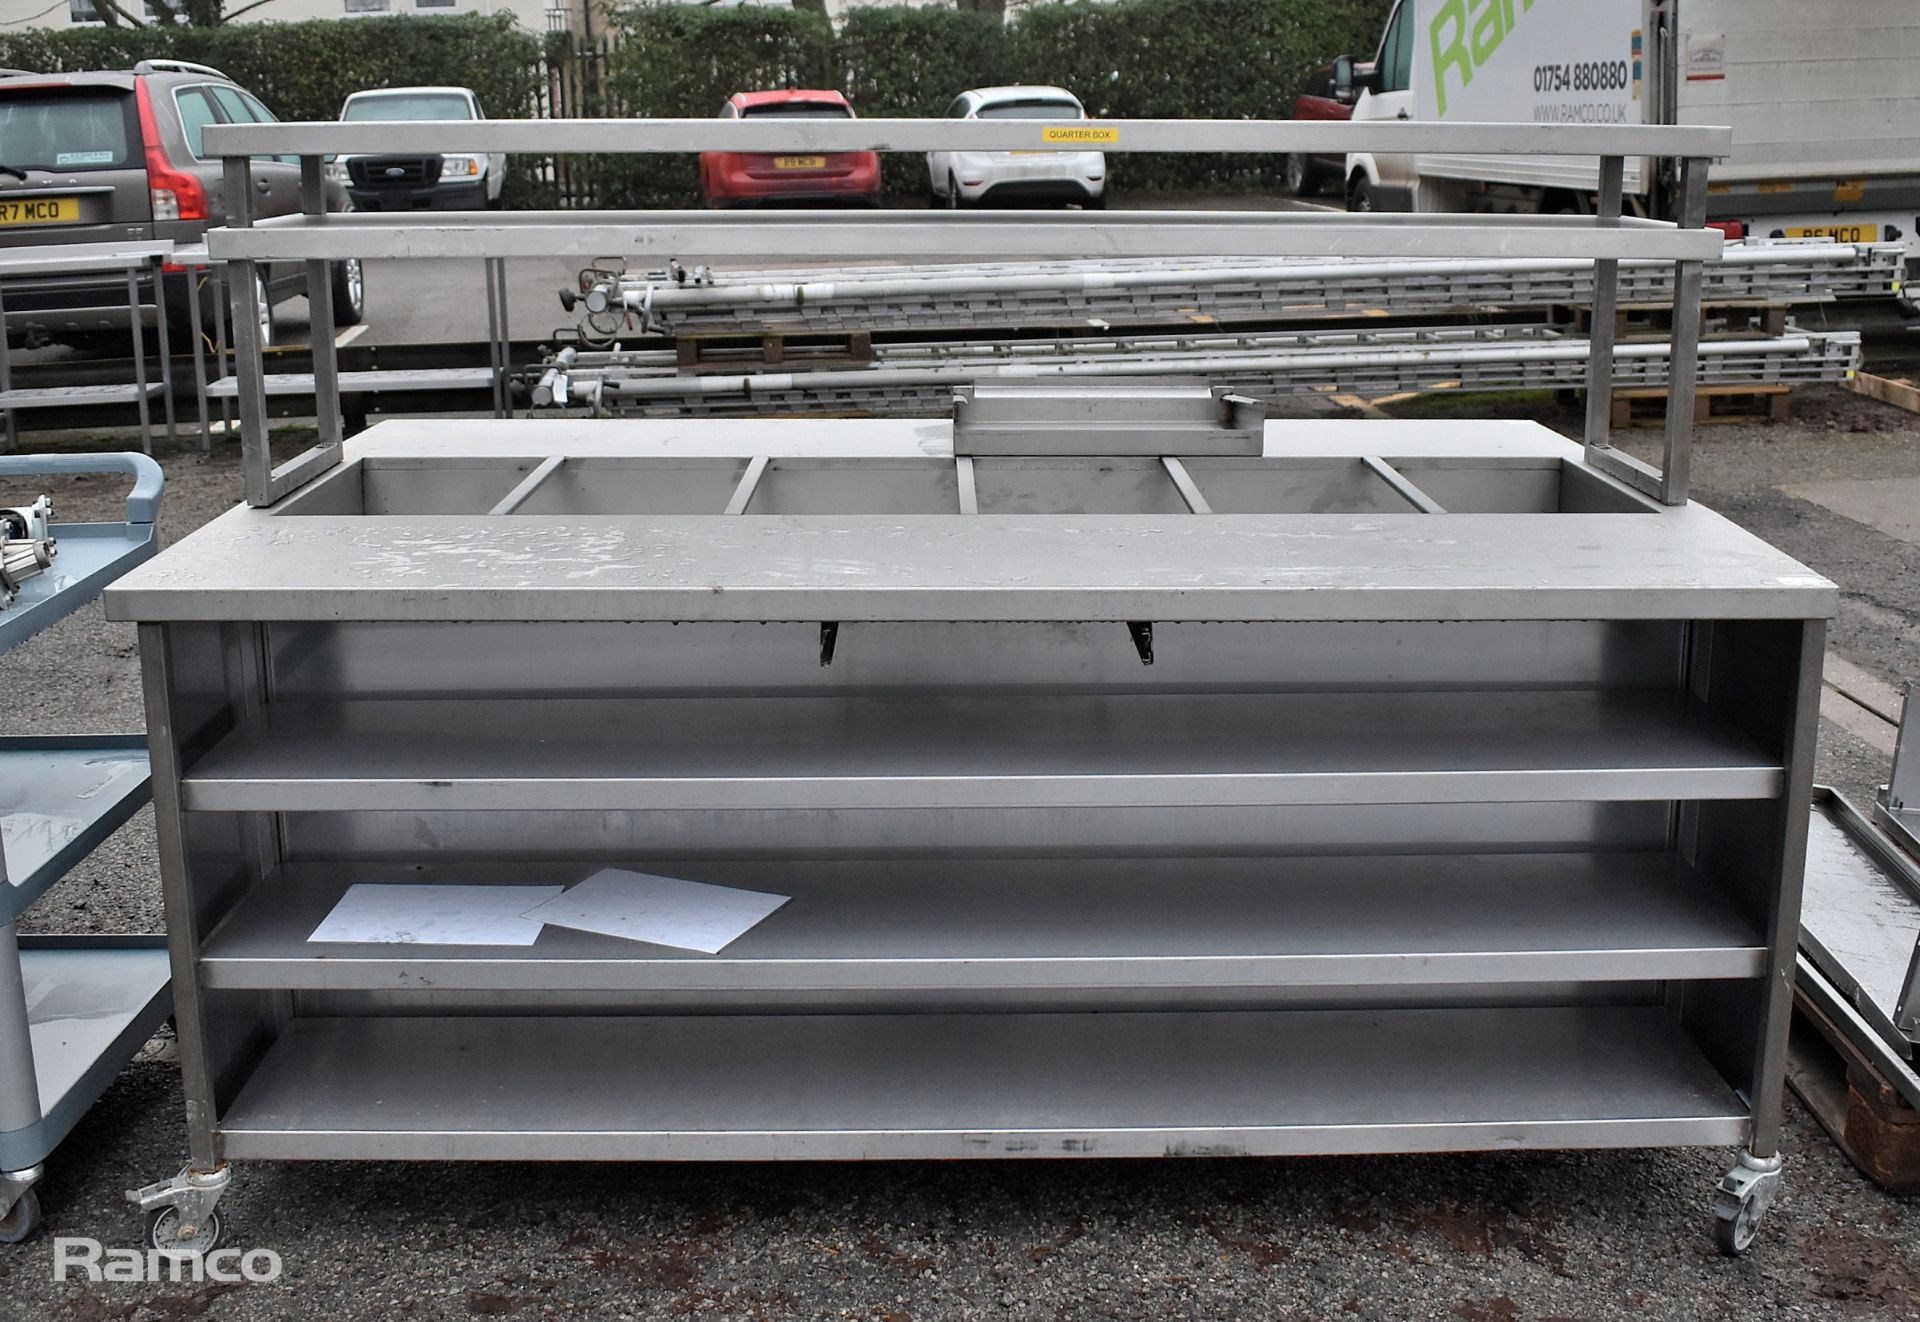 Stainless steel Prep station/Service station - L210 x W140 x H200 approximately - Image 7 of 7